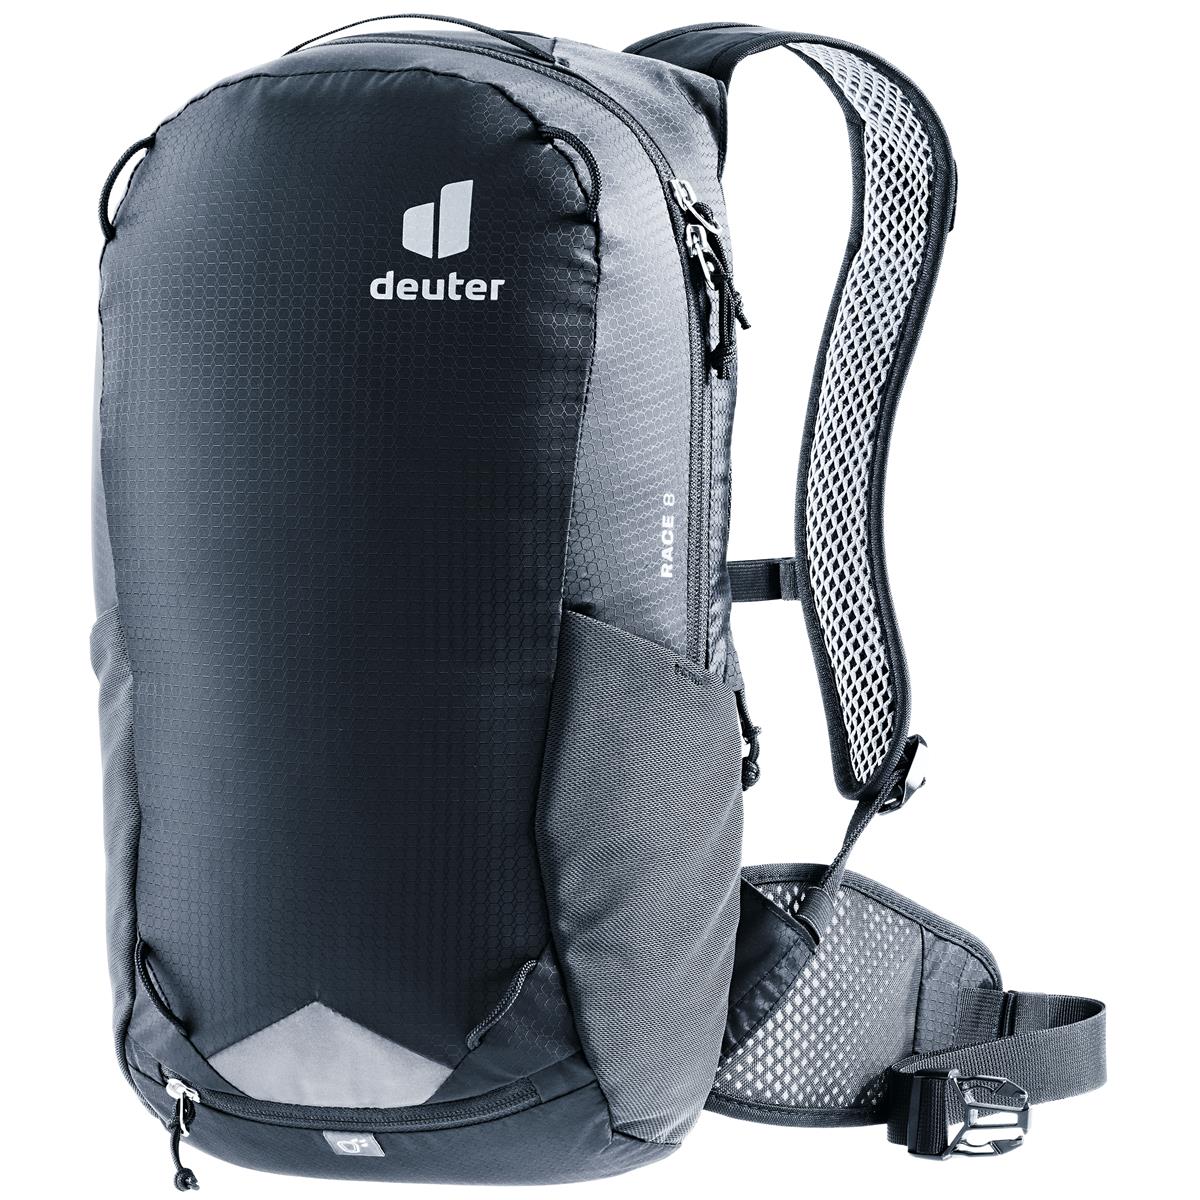 Deuter MTB Backpack with Hydration System Compartment Race 8 8L - Black